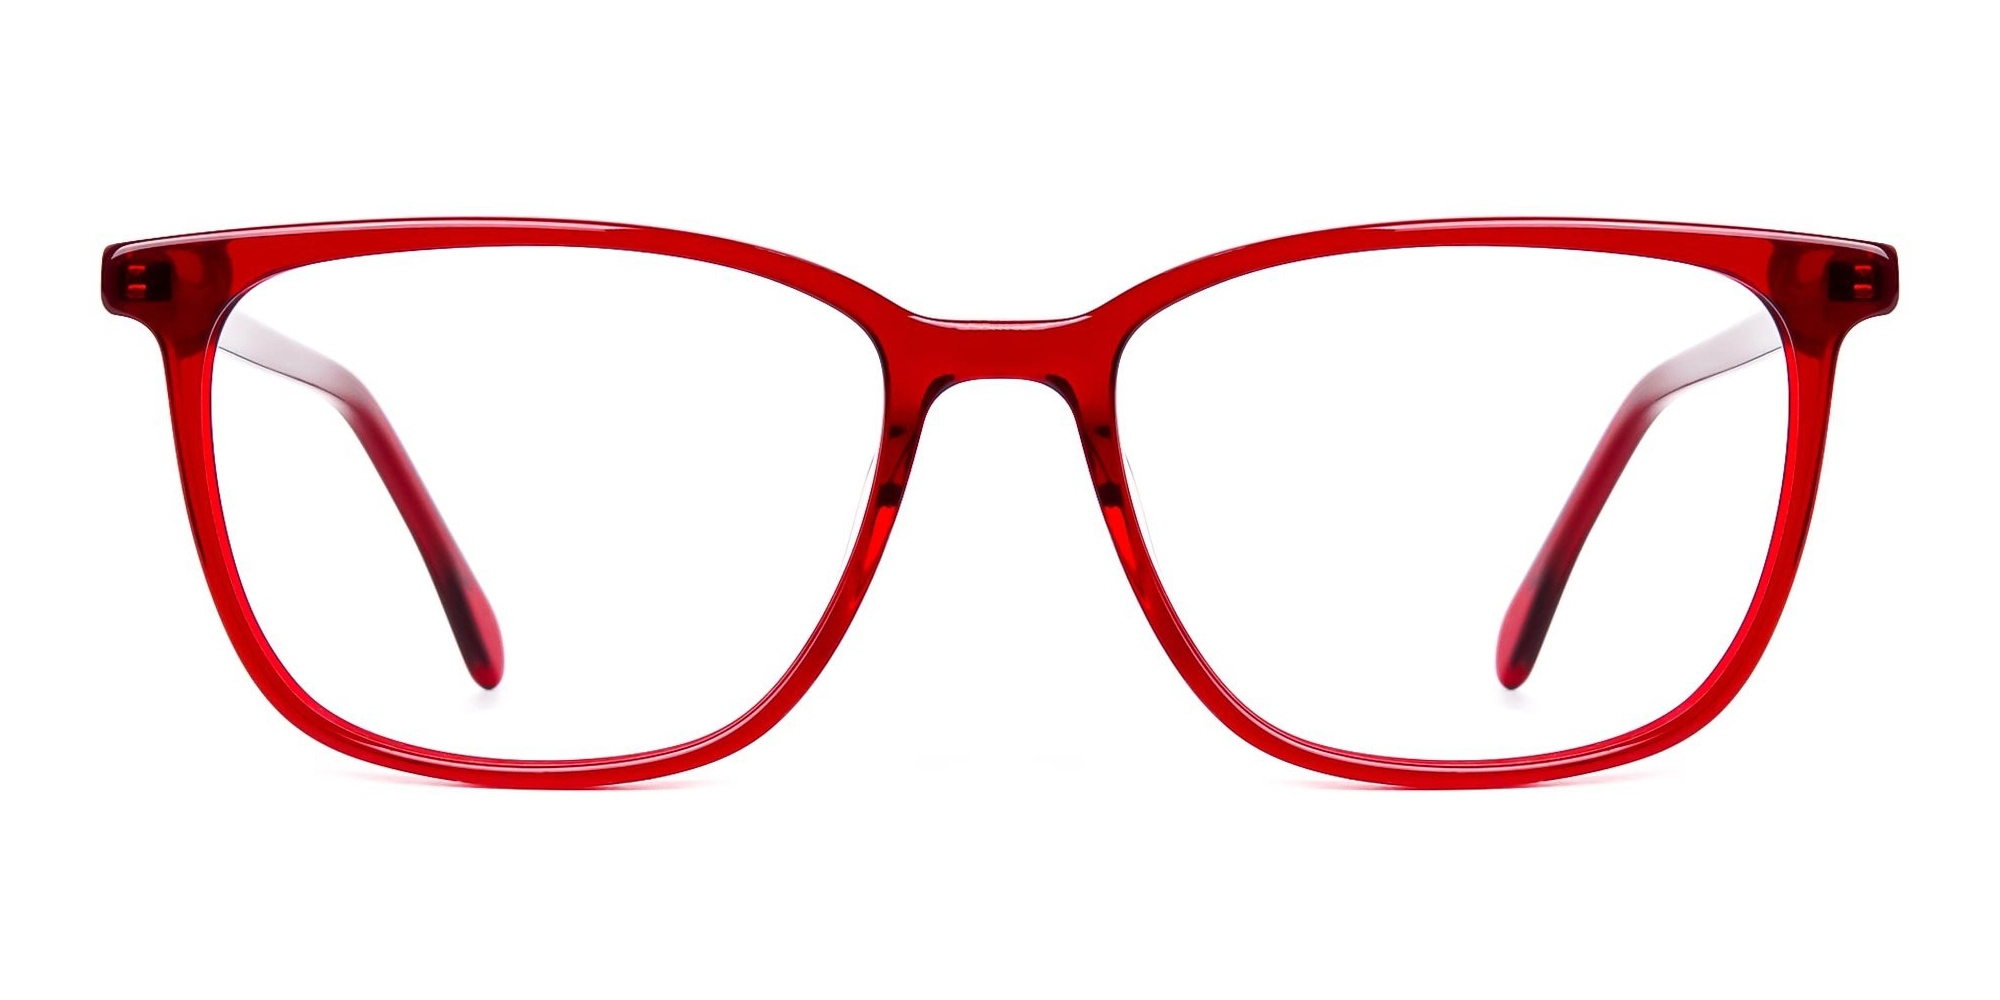 Wine-Red-square-and-Rectangular-Glasses-Frames-1